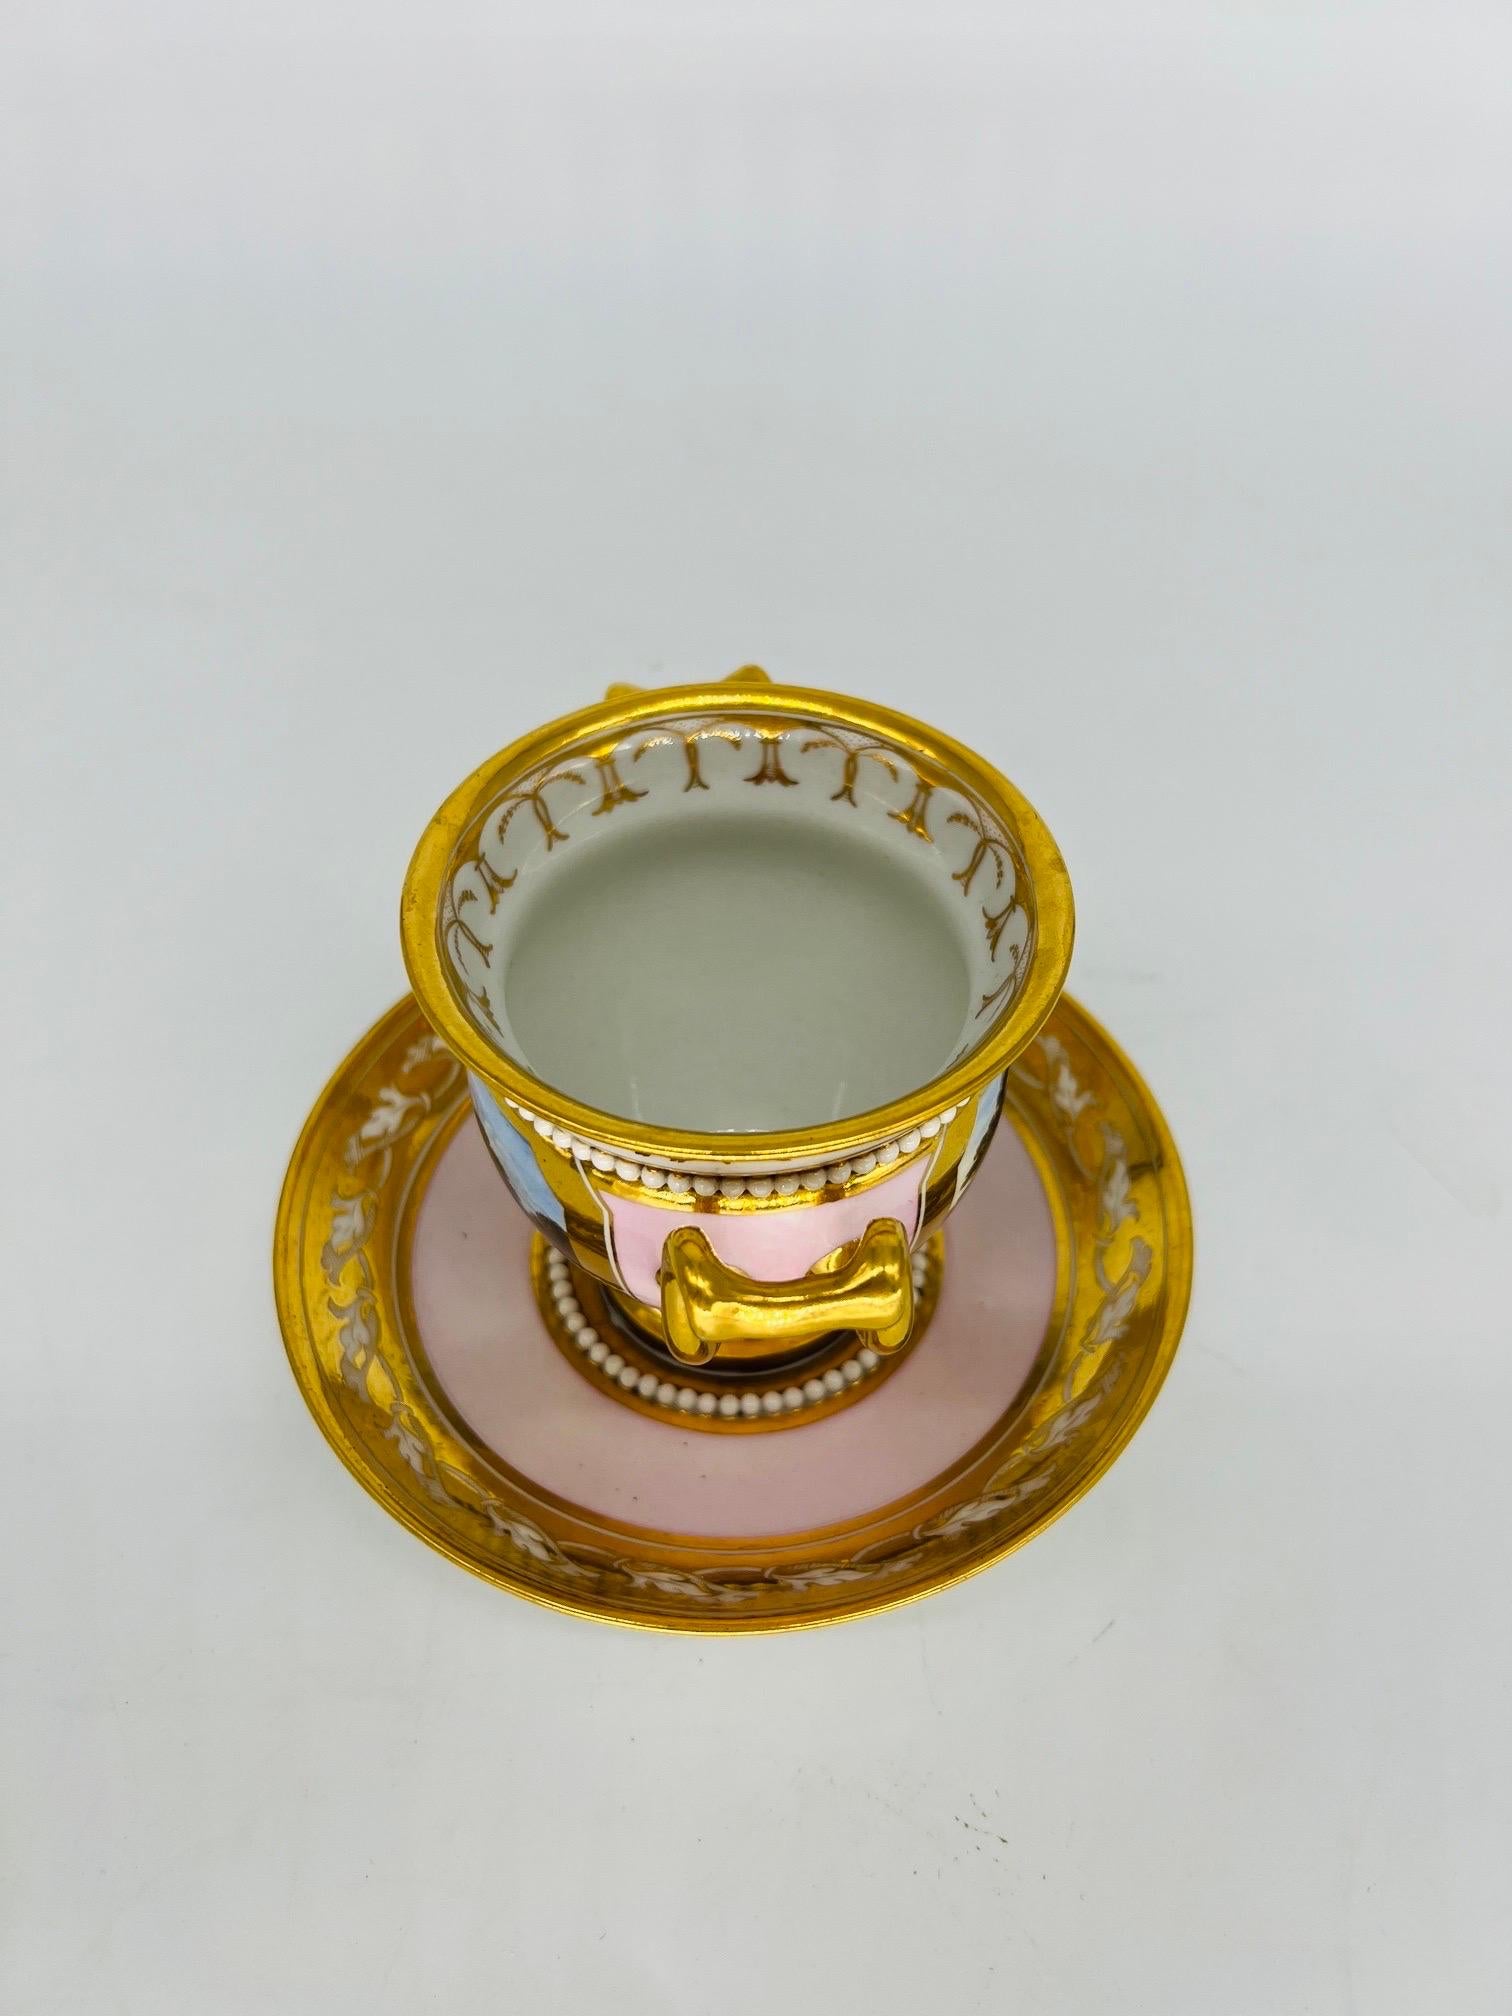 Flight Barr & Barr Porcelain Cabinet Cup & Saucer Attr Thomas Baxter, circa 1815 In Good Condition For Sale In Atlanta, GA